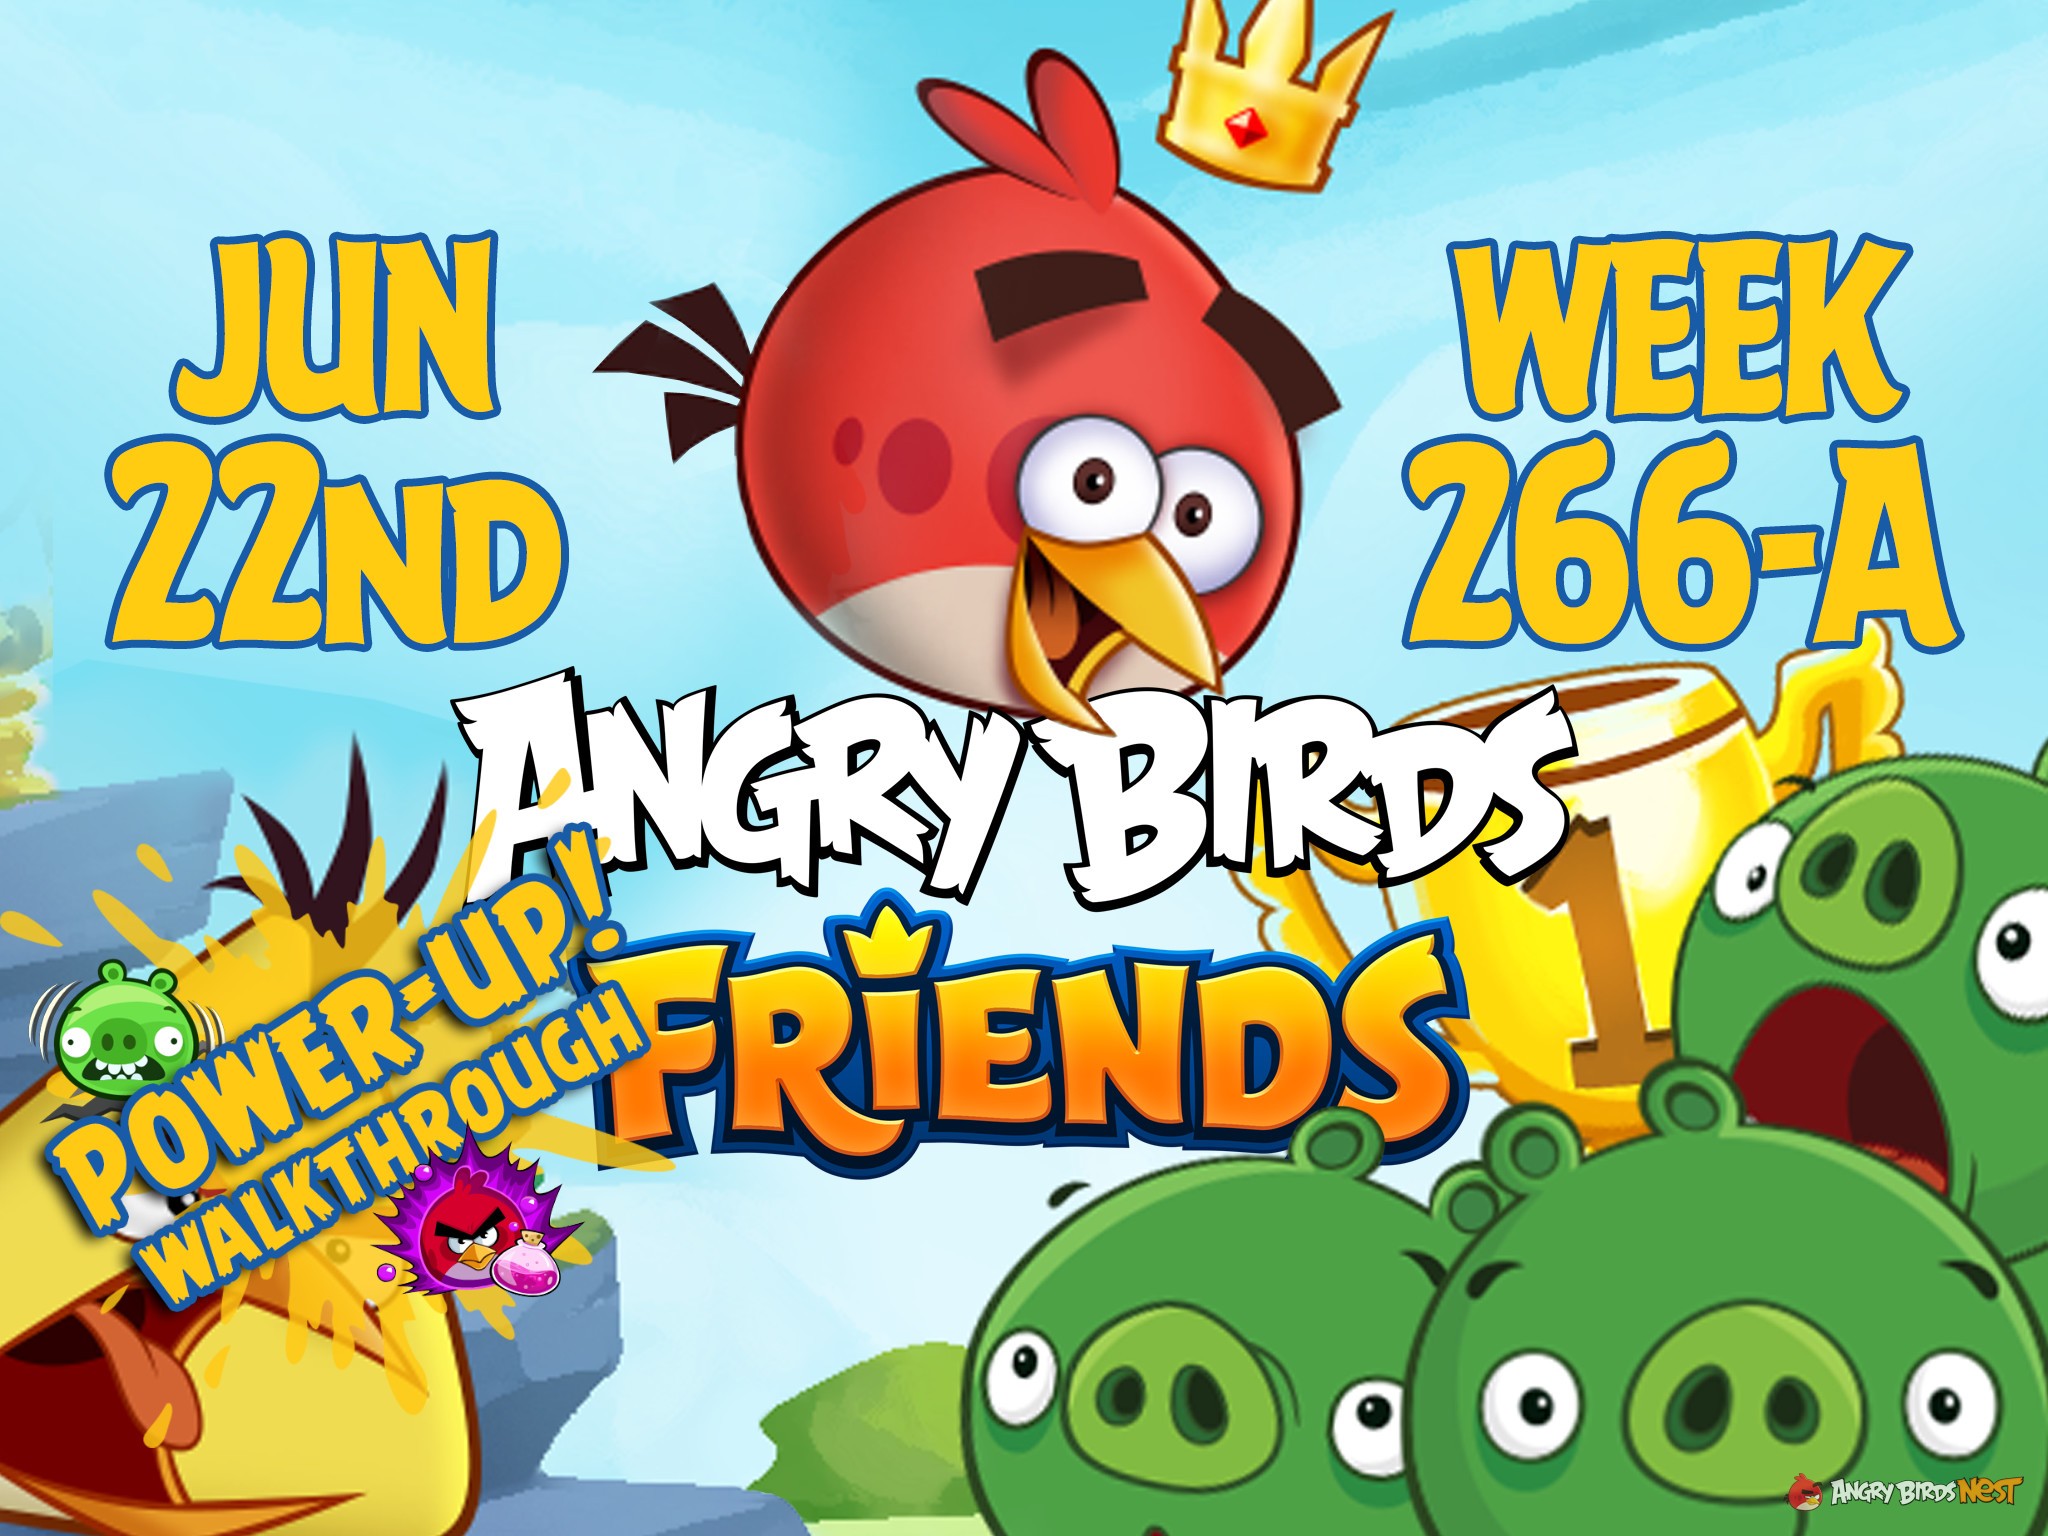 Angry Birds Friends Tournament Week 266-A Feature Image PU